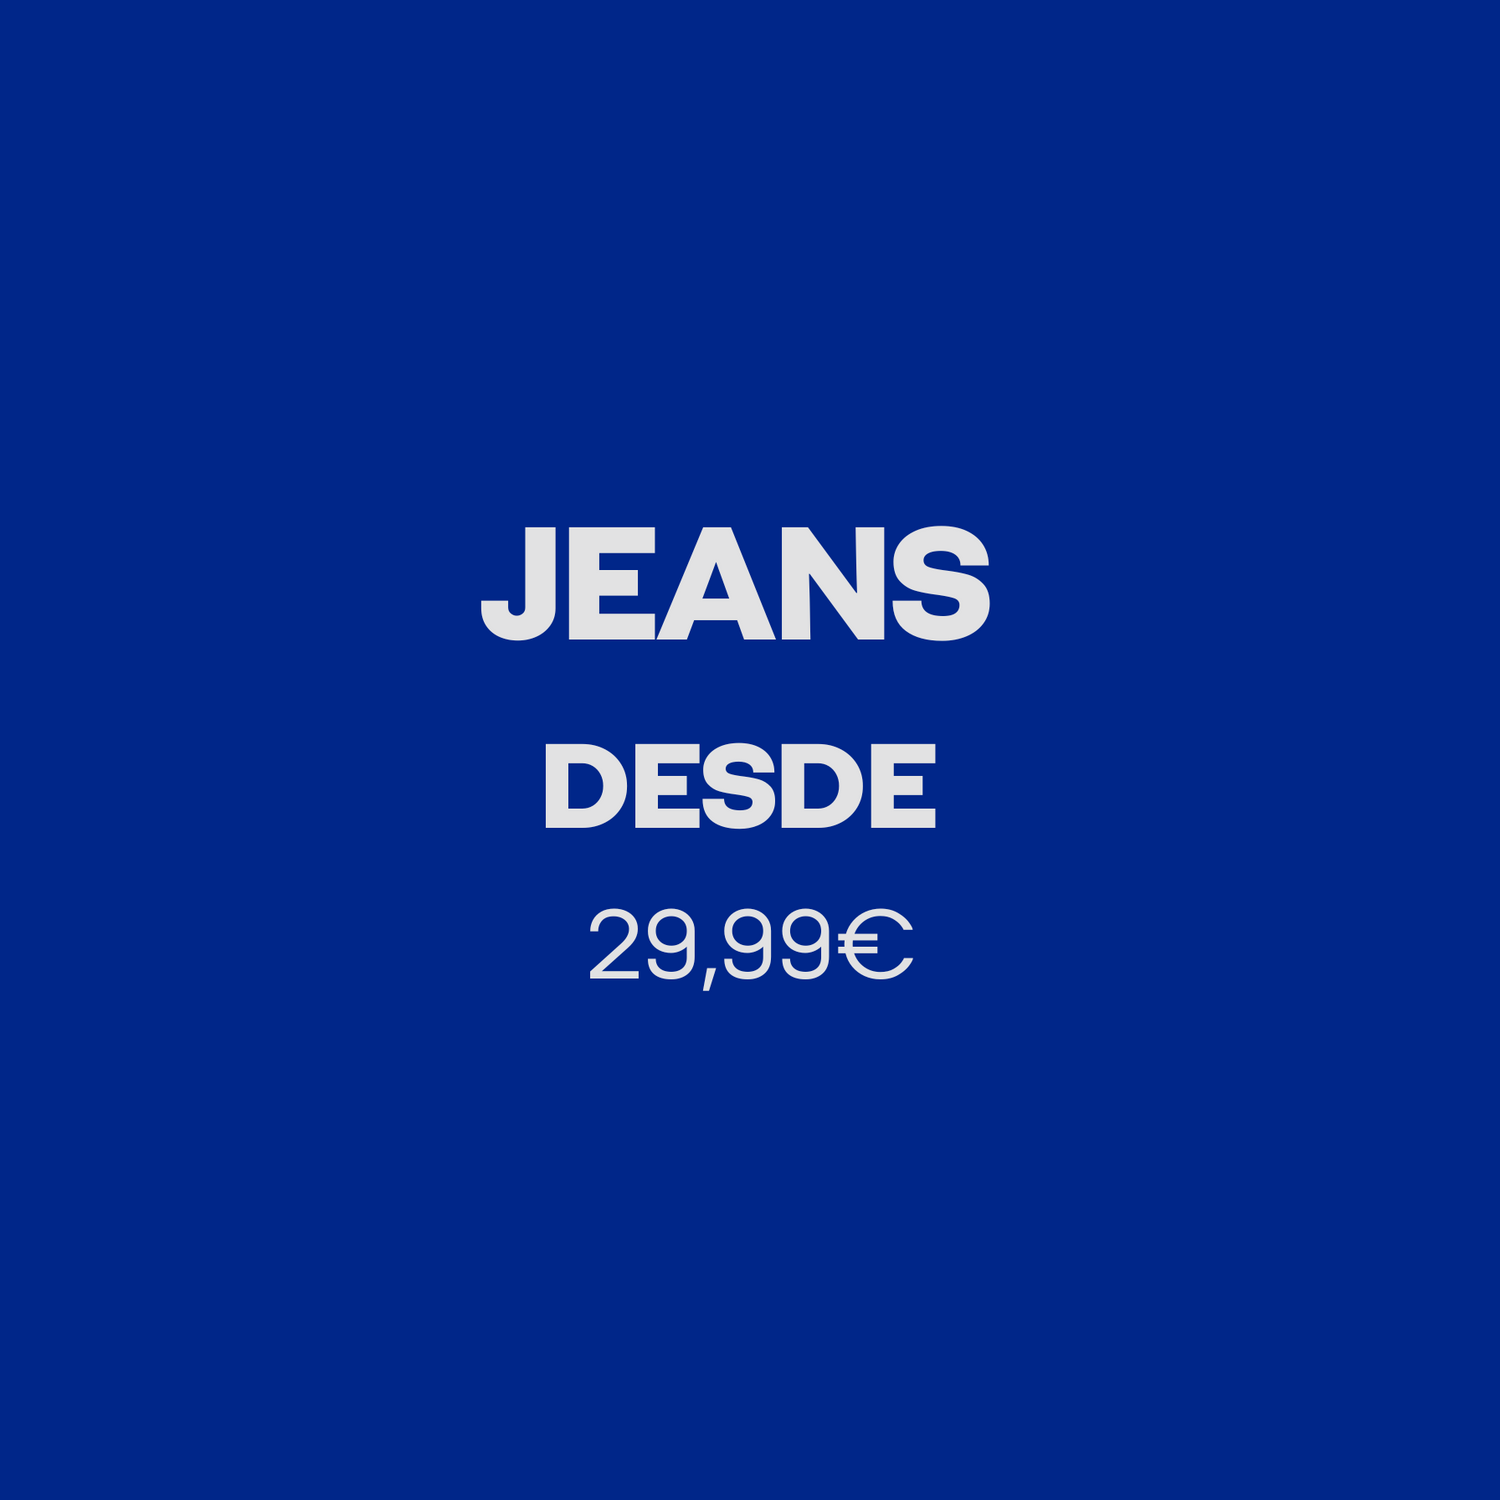 JEANS SINGLE DAY